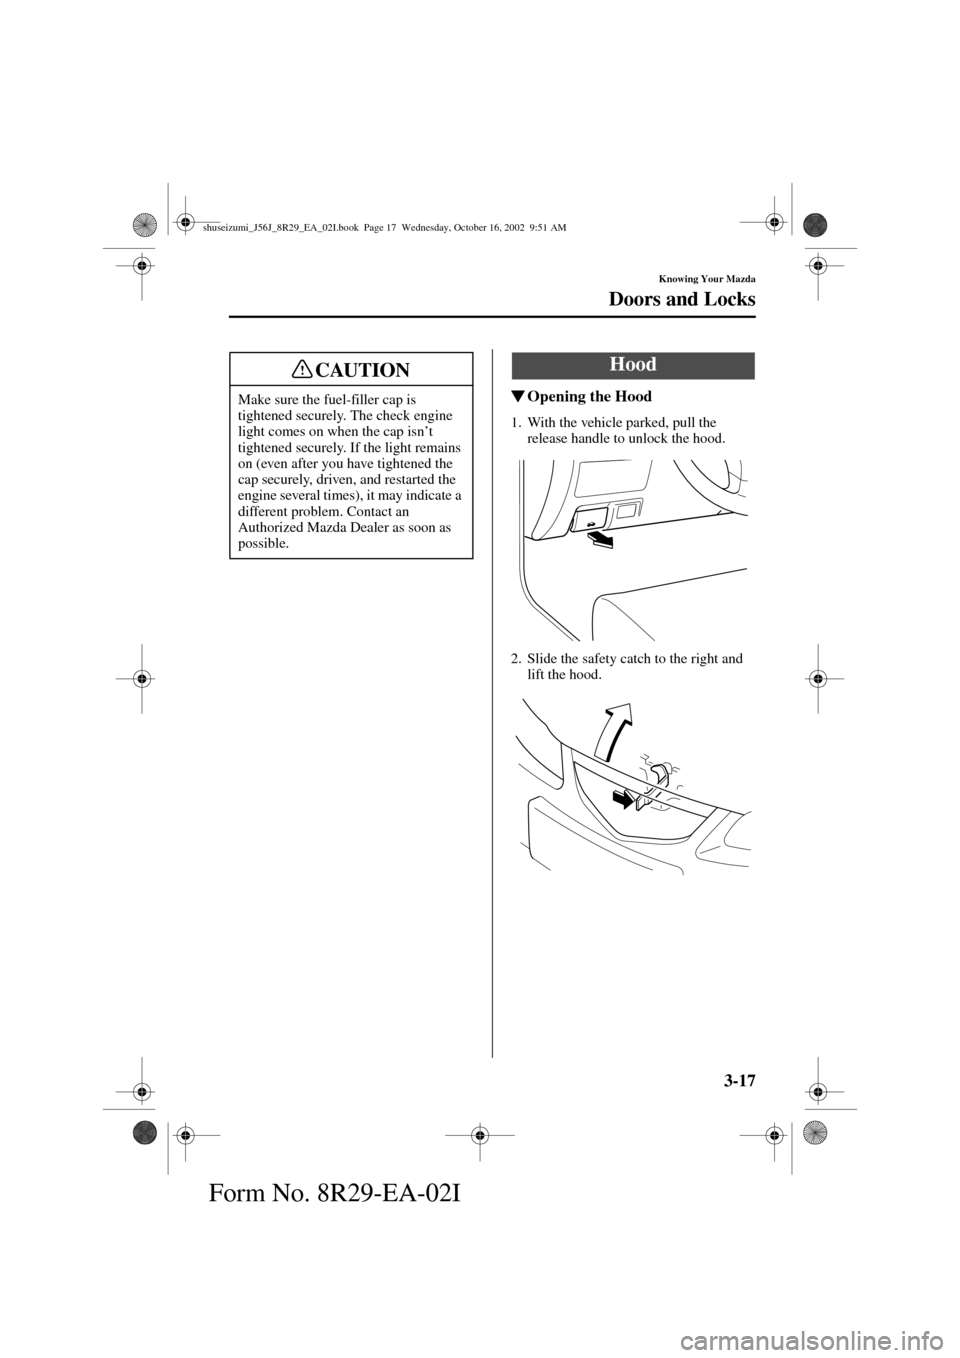 MAZDA MODEL 6 2003  Owners Manual (in English) 3-17
Knowing Your Mazda
Doors and Locks
Form No. 8R29-EA-02I
Opening the Hood
1. With the vehicle parked, pull the 
release handle to unlock the hood.
2. Slide the safety catch to the right and 
lift